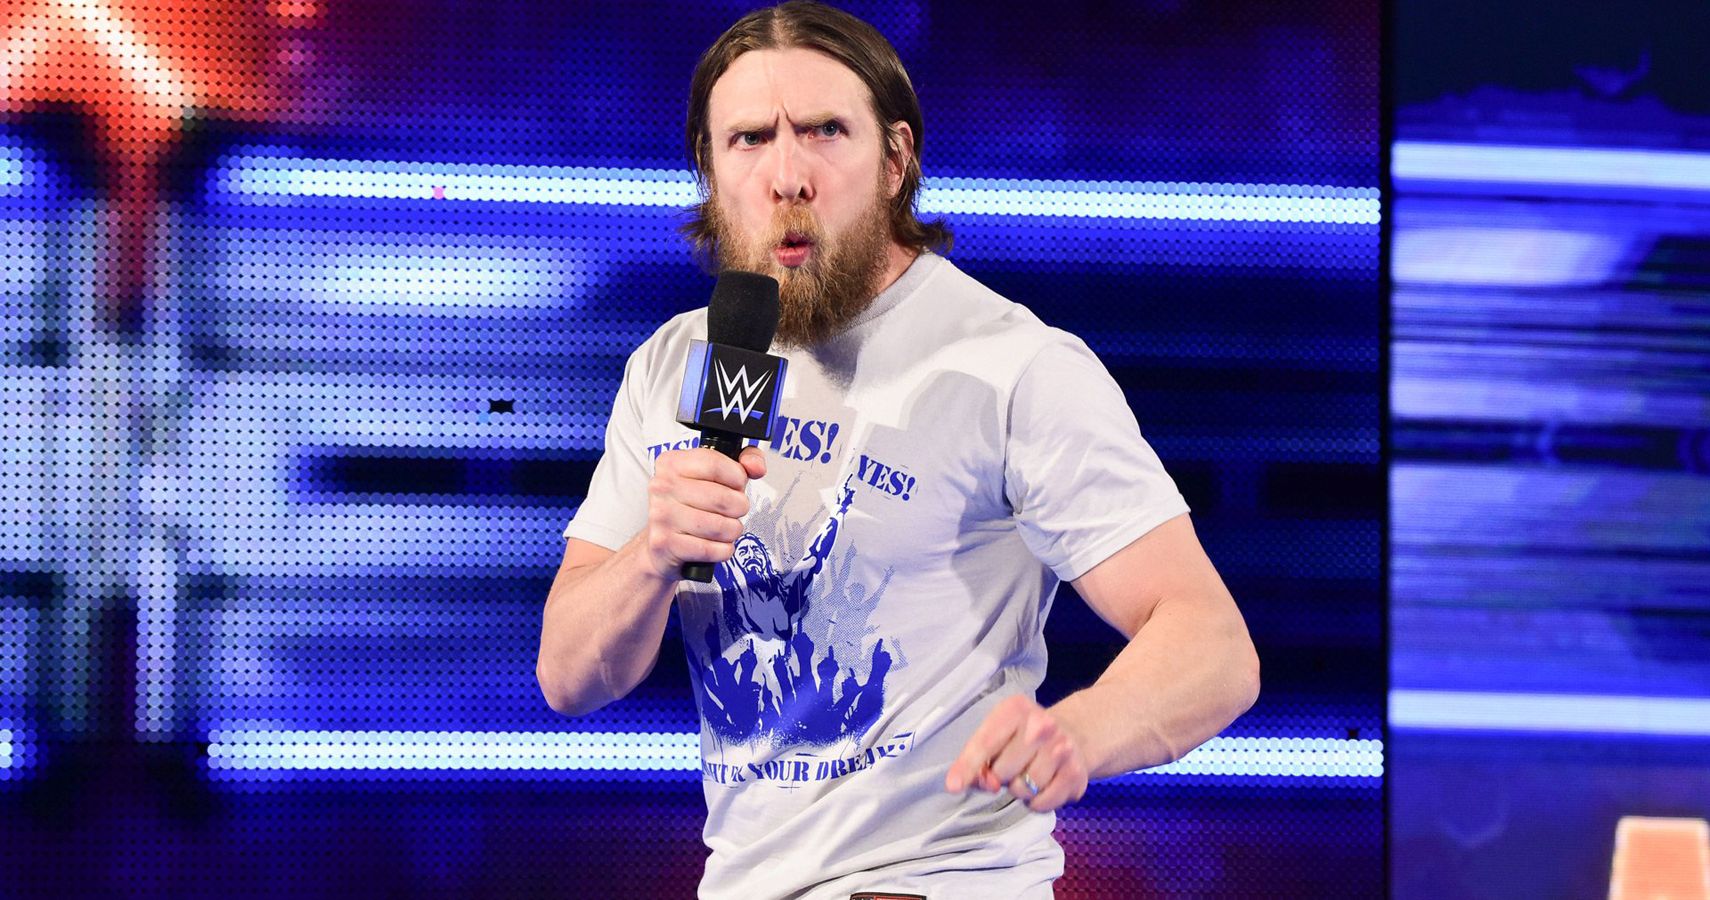 Myers Briggs Personality Types Of WWE Stars